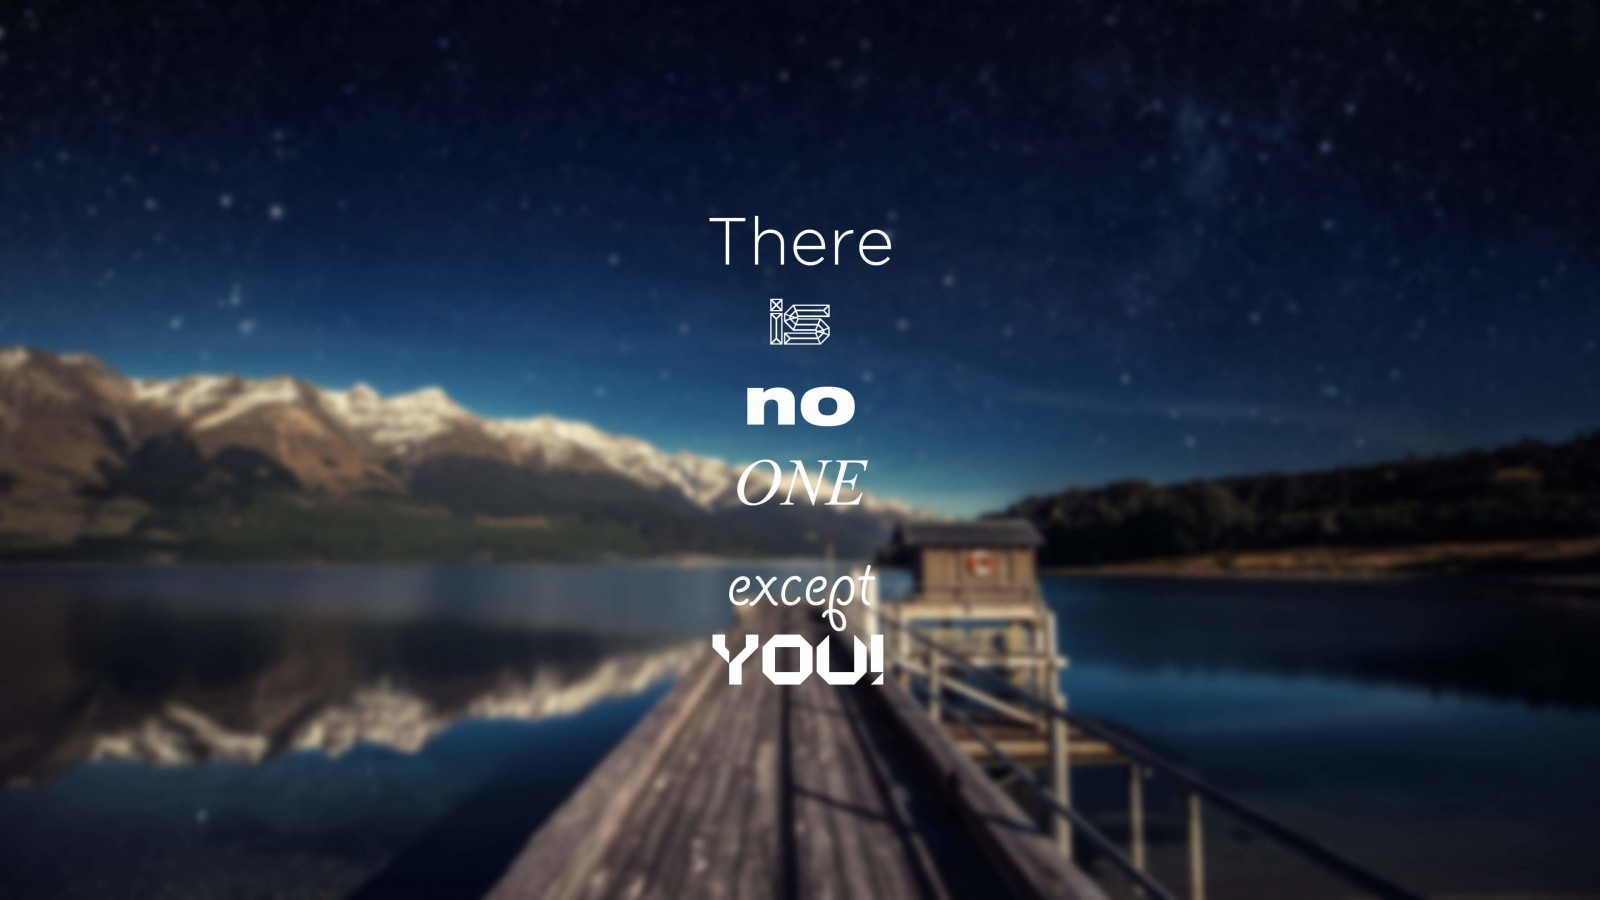 There Is No One Except You Wallpaper for Desktop 1600x900